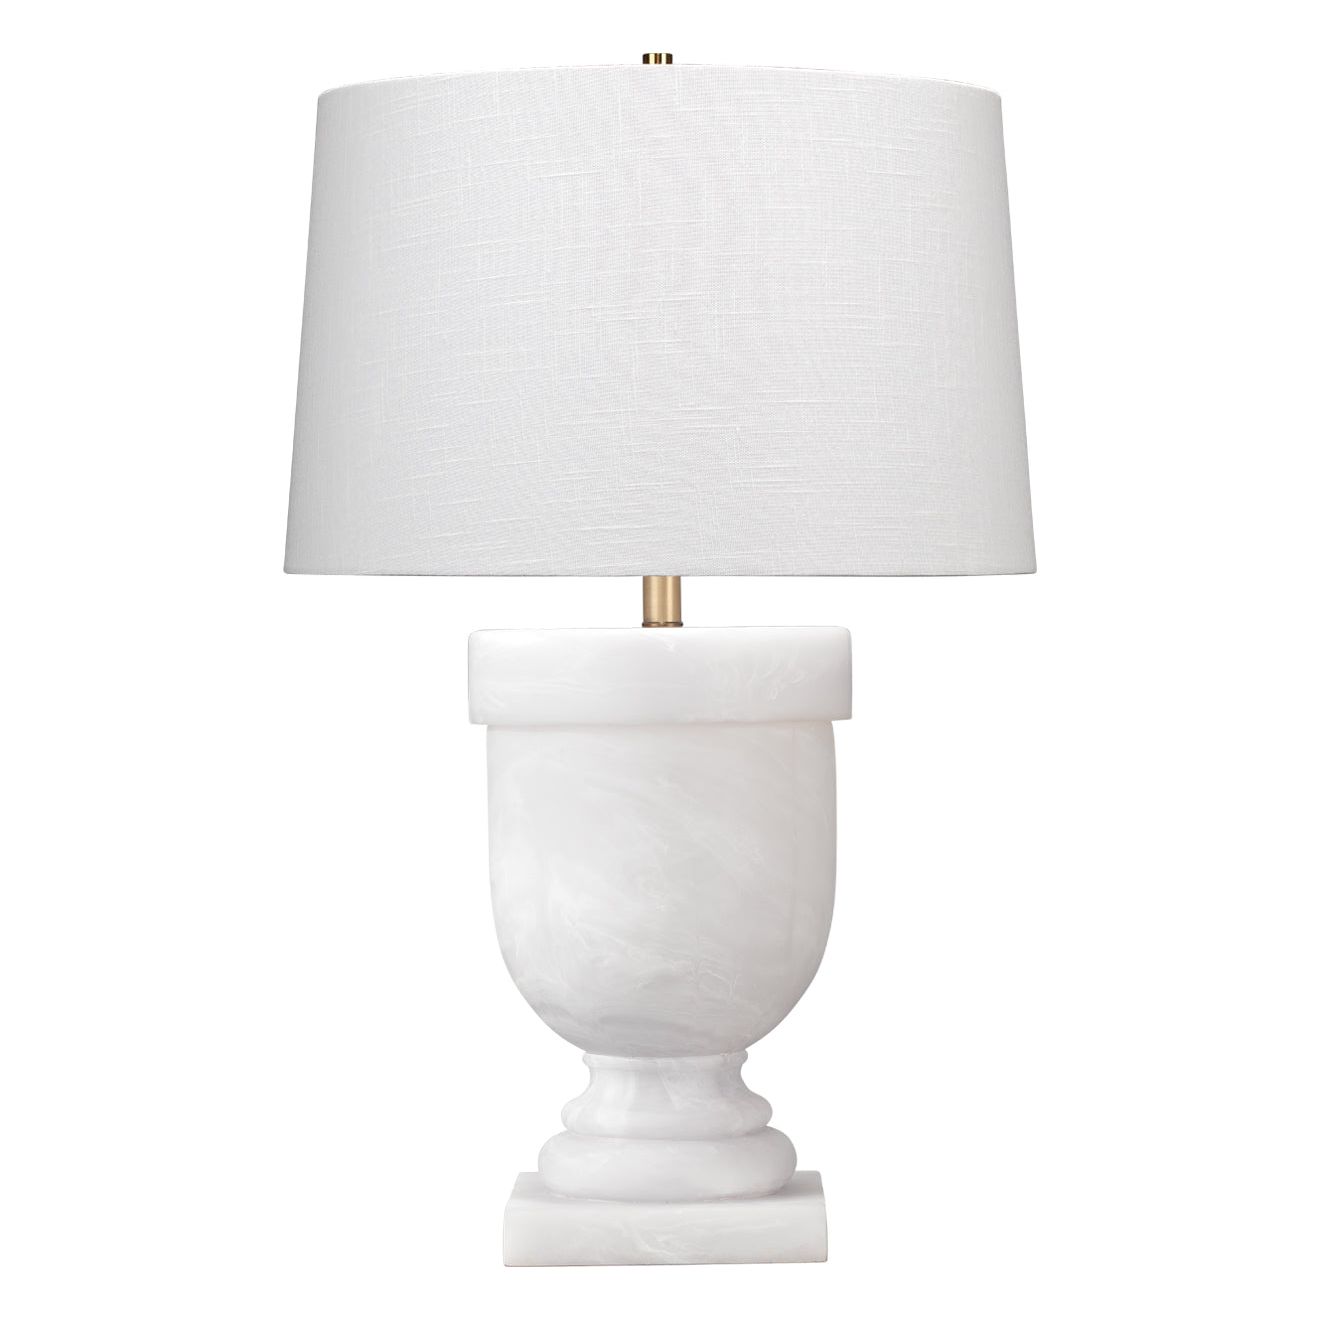 Jamie Young Company - 9CARNEGIEWH - Carnegie Table Lamp - Carnegie - White